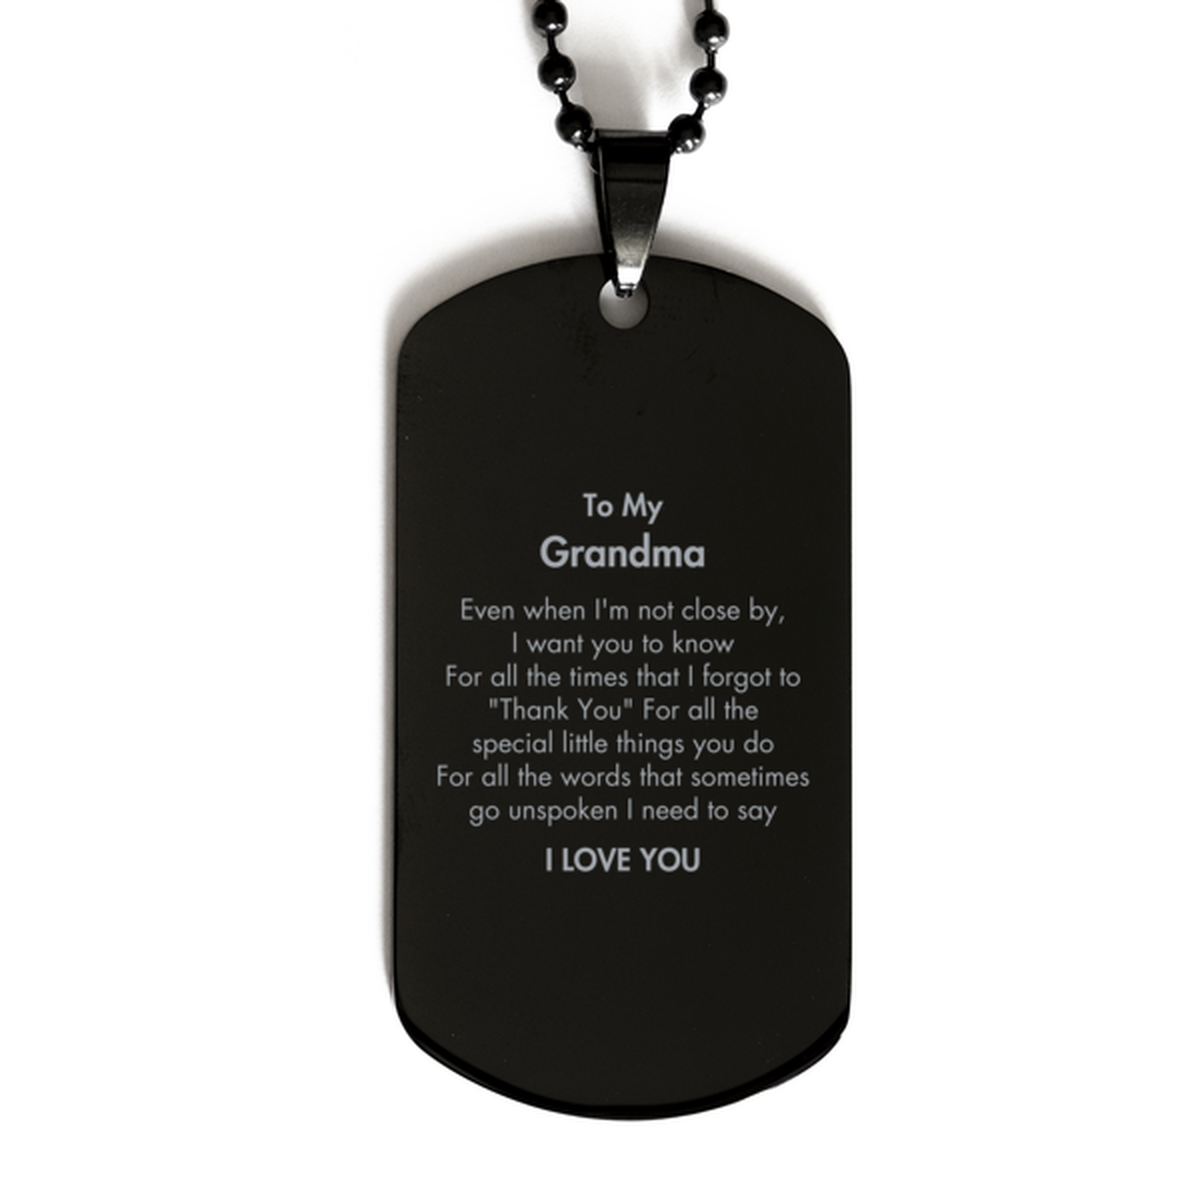 Thank You Gifts for Grandma, Keepsake Black Dog Tag Gifts for Grandma Birthday Mother's day Father's Day Grandma For all the words That sometimes go unspoken I need to say I LOVE YOU